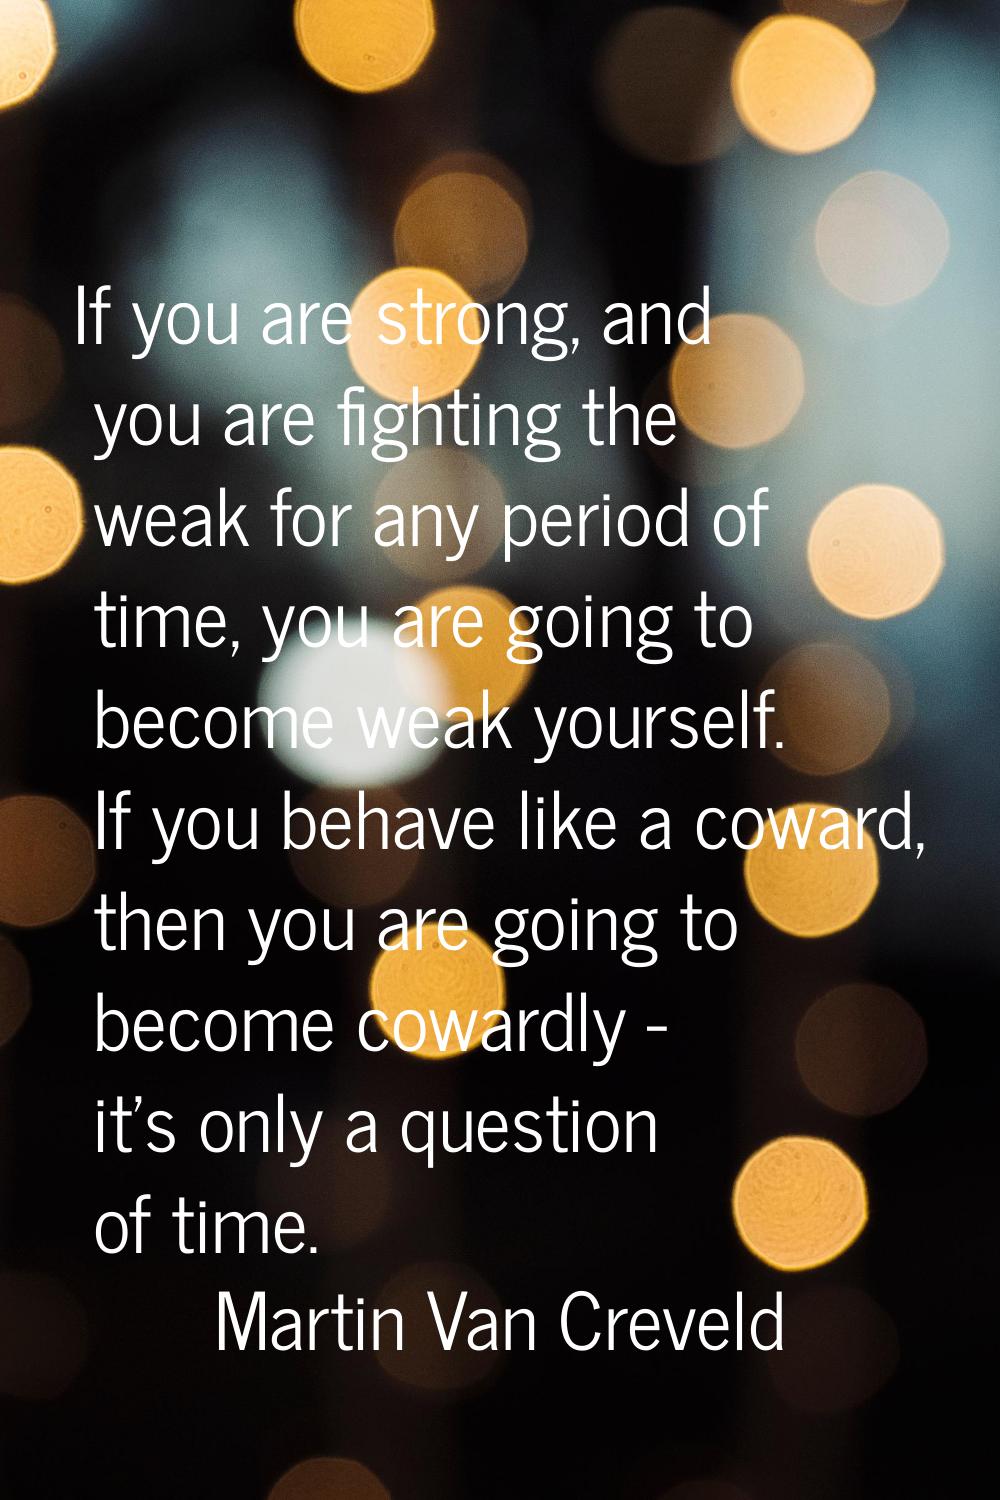 If you are strong, and you are fighting the weak for any period of time, you are going to become we